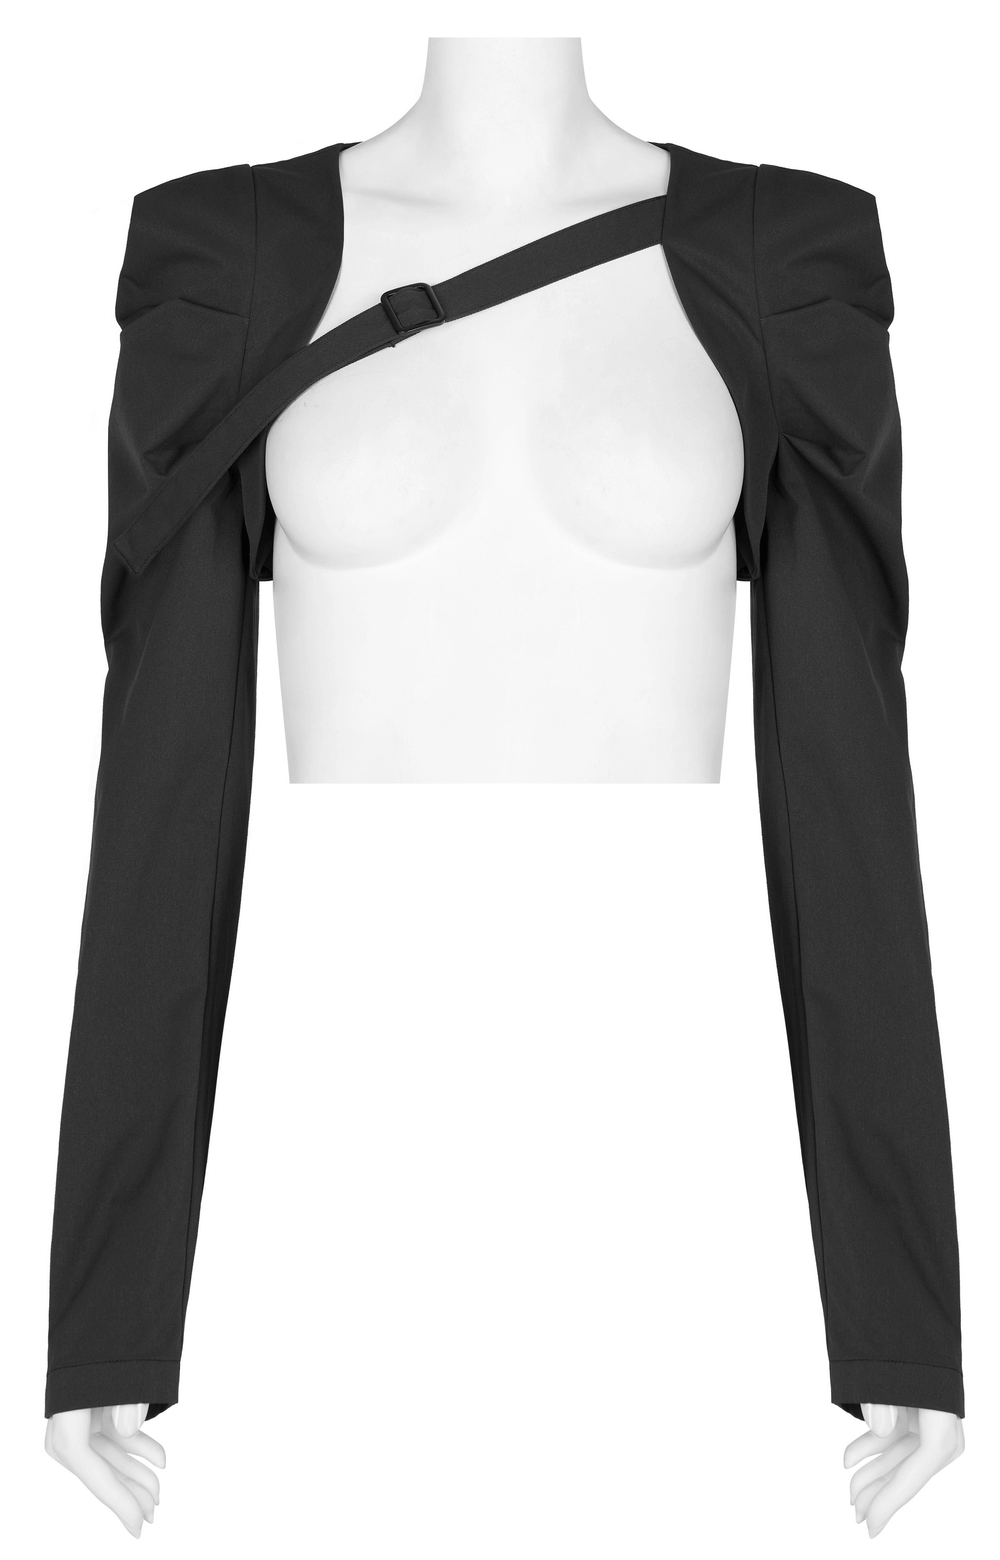 Black Long Sleeve Cropped Bolero Top with Strap